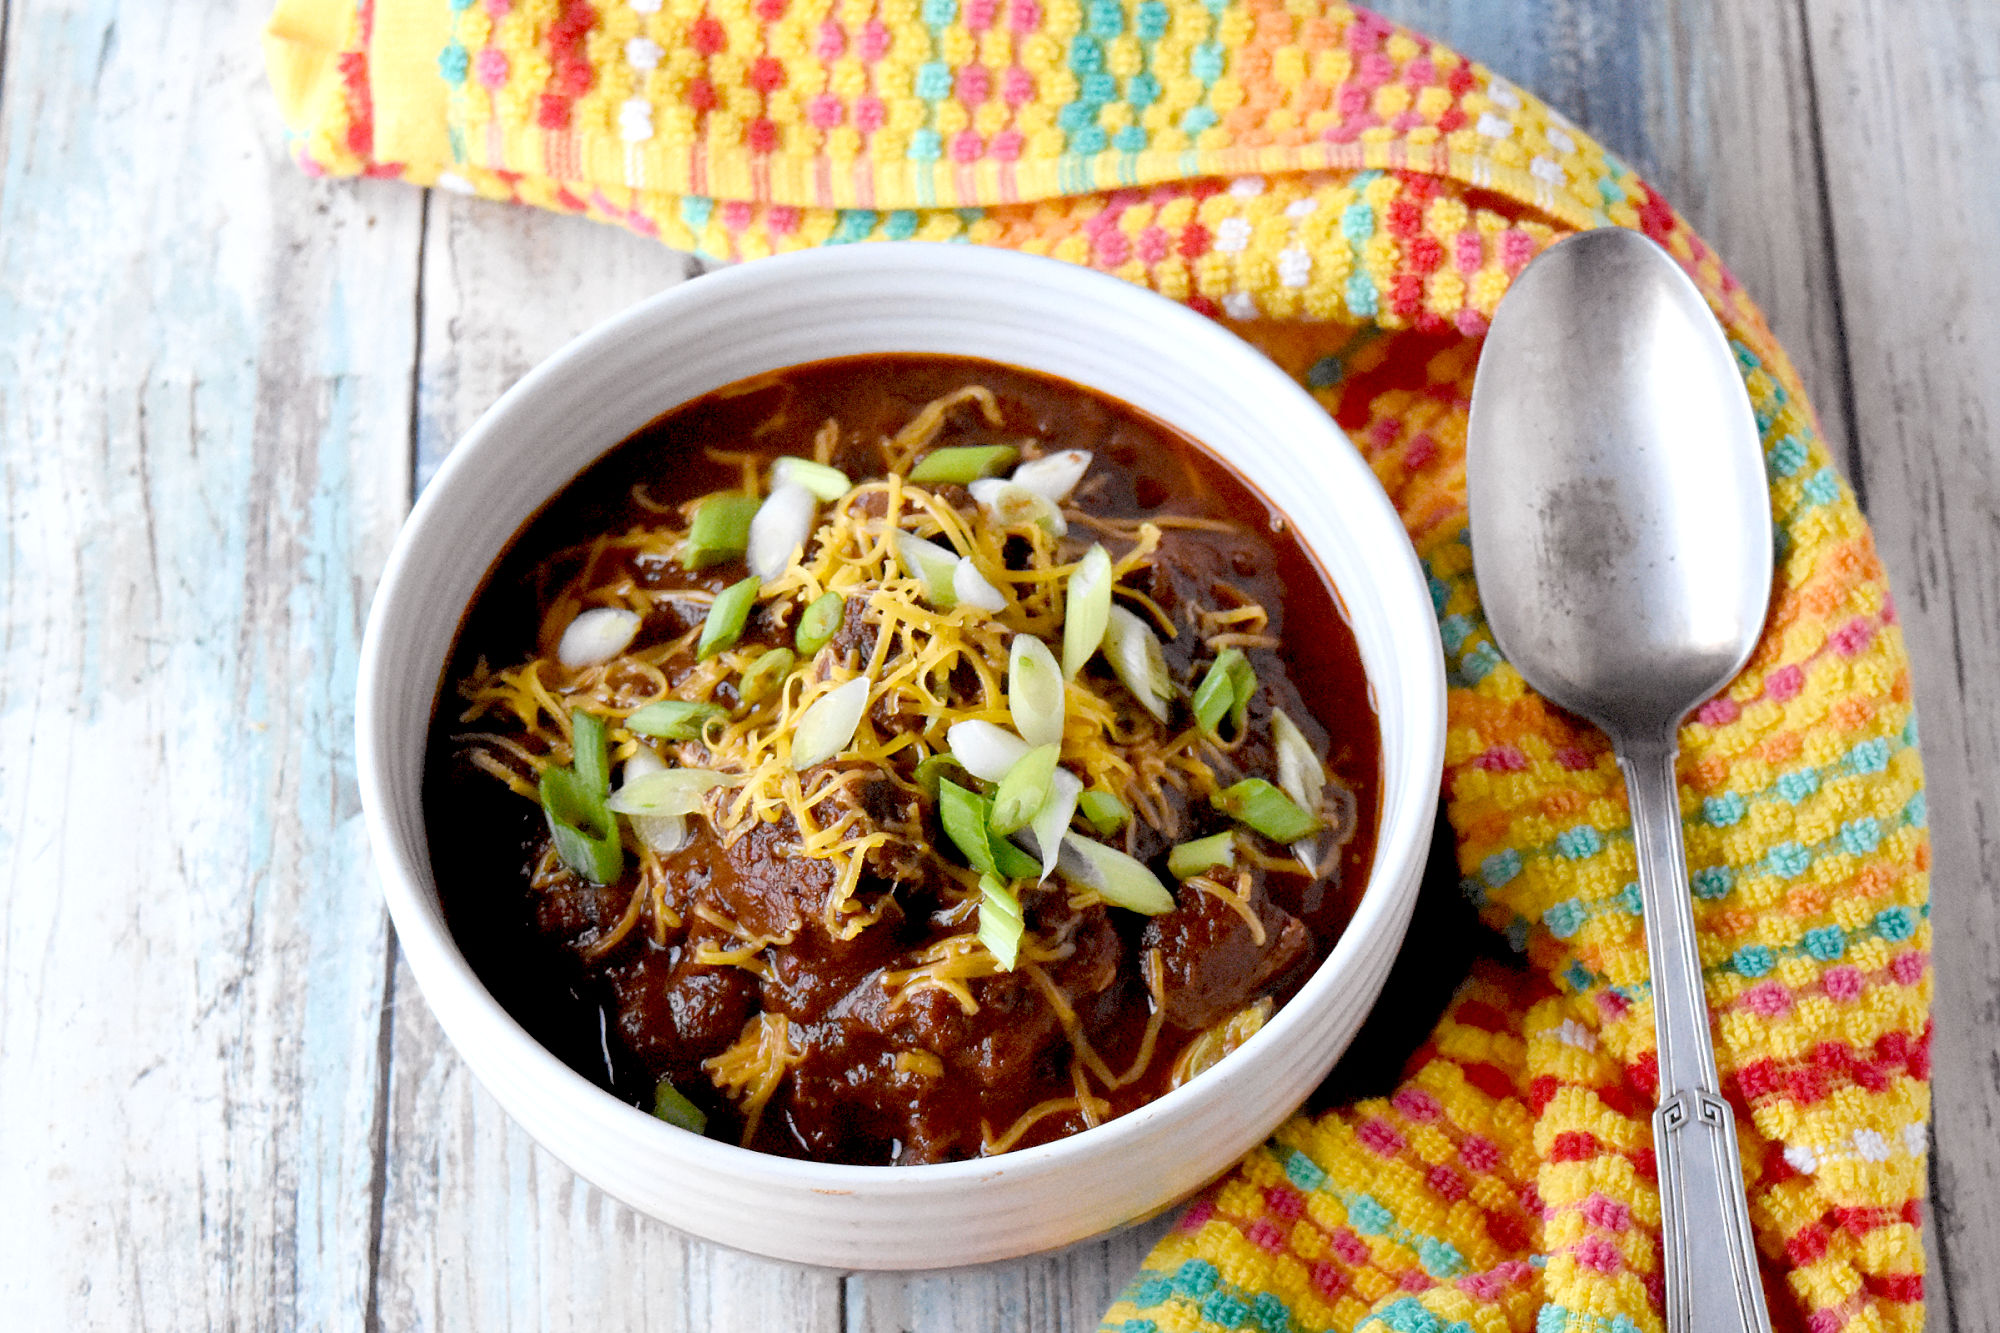 Texas Style Steak Chili is hearty, rich, and full of mild chile flavors. Four chile peppers are the base of this authentic style Texas chili your family will love! #TexasChili #nobeans #SelefinaSpices #homemade #chilibowl